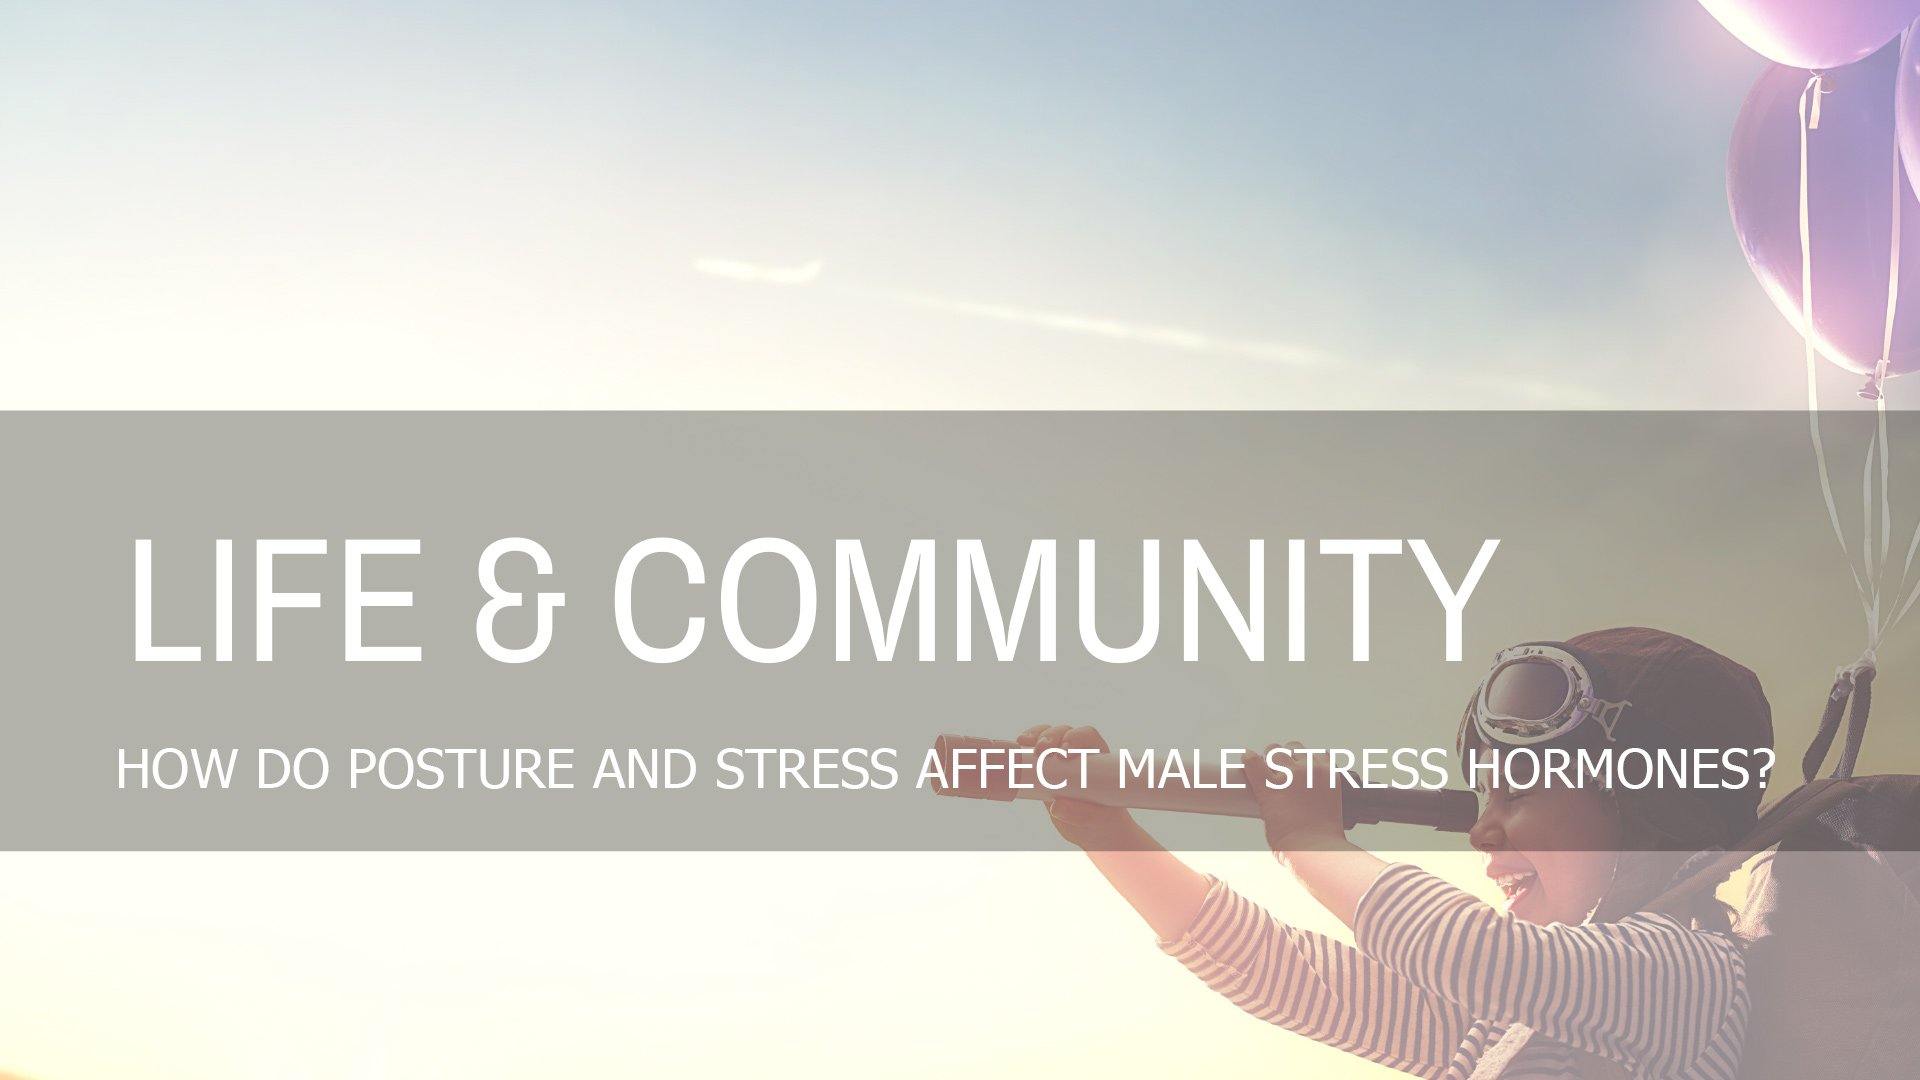 How Does Posture and Stress Affect Male Sex Hormones?